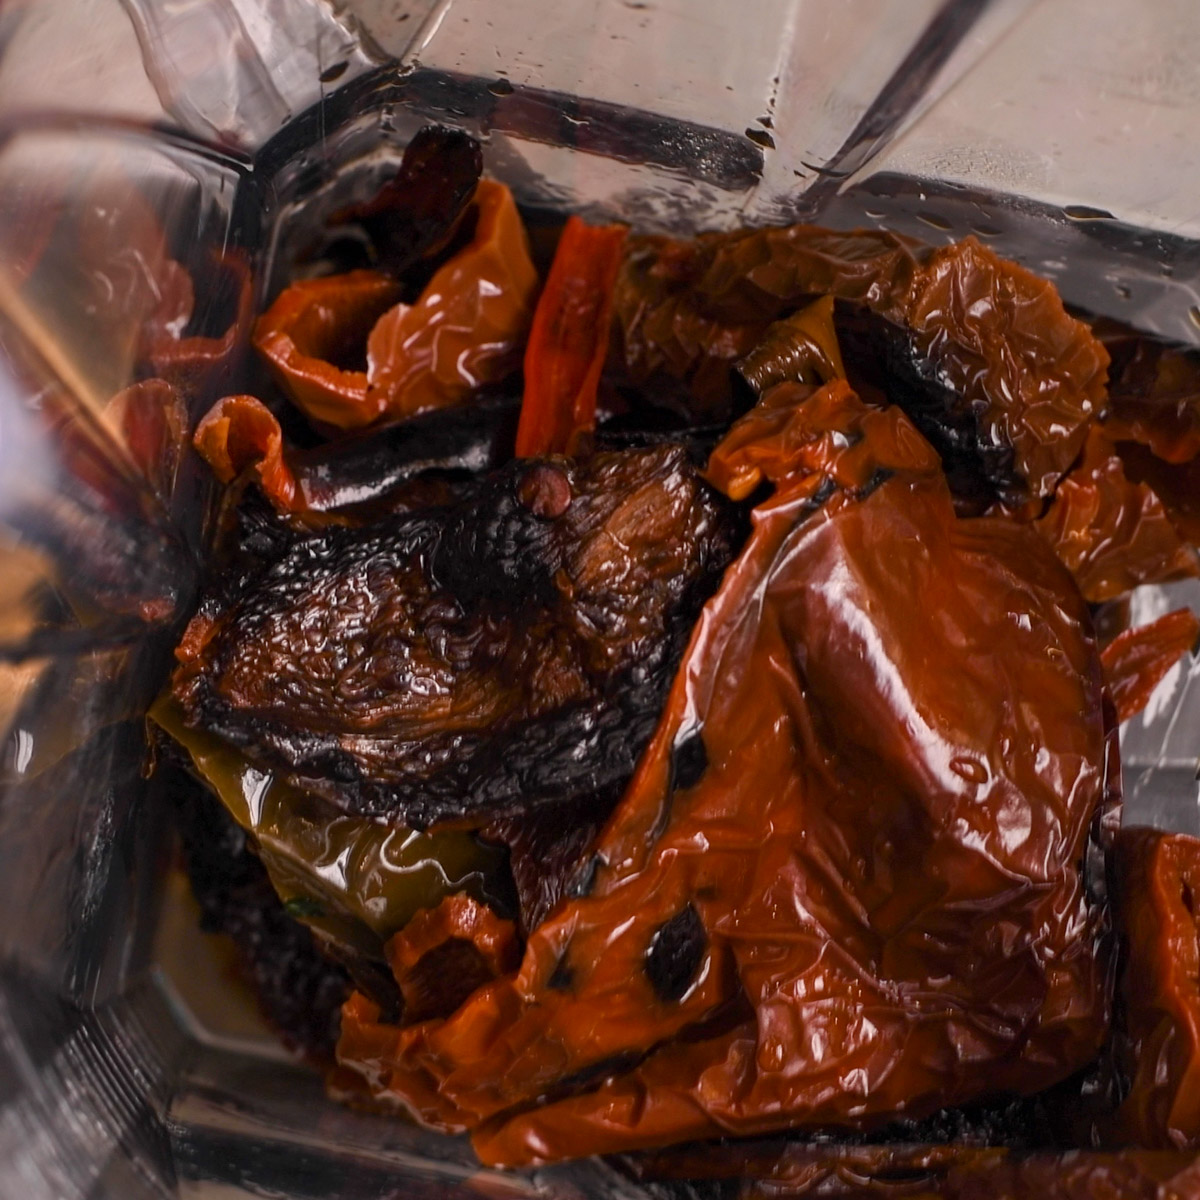 Add the soaked chiles to a blender.